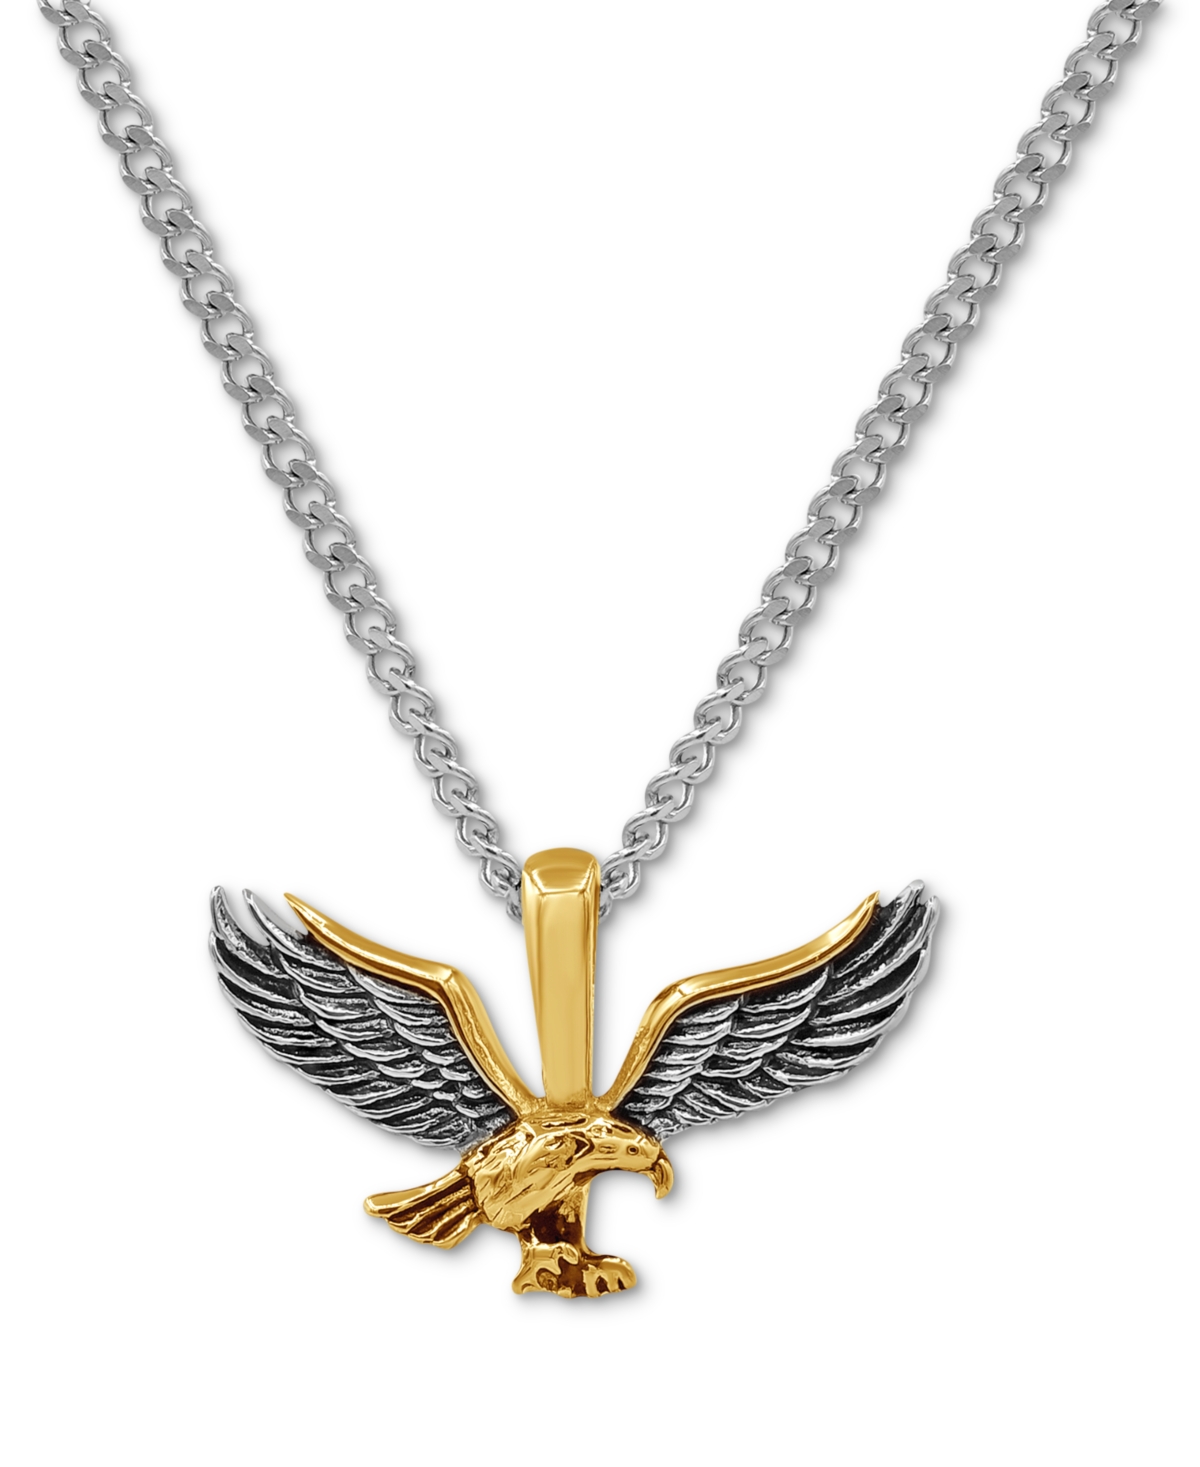 Men's Two-Tone Eagle 24" Pendant Necklace in Stainless Steel & Yellow Ion-Plate - Two-Tone